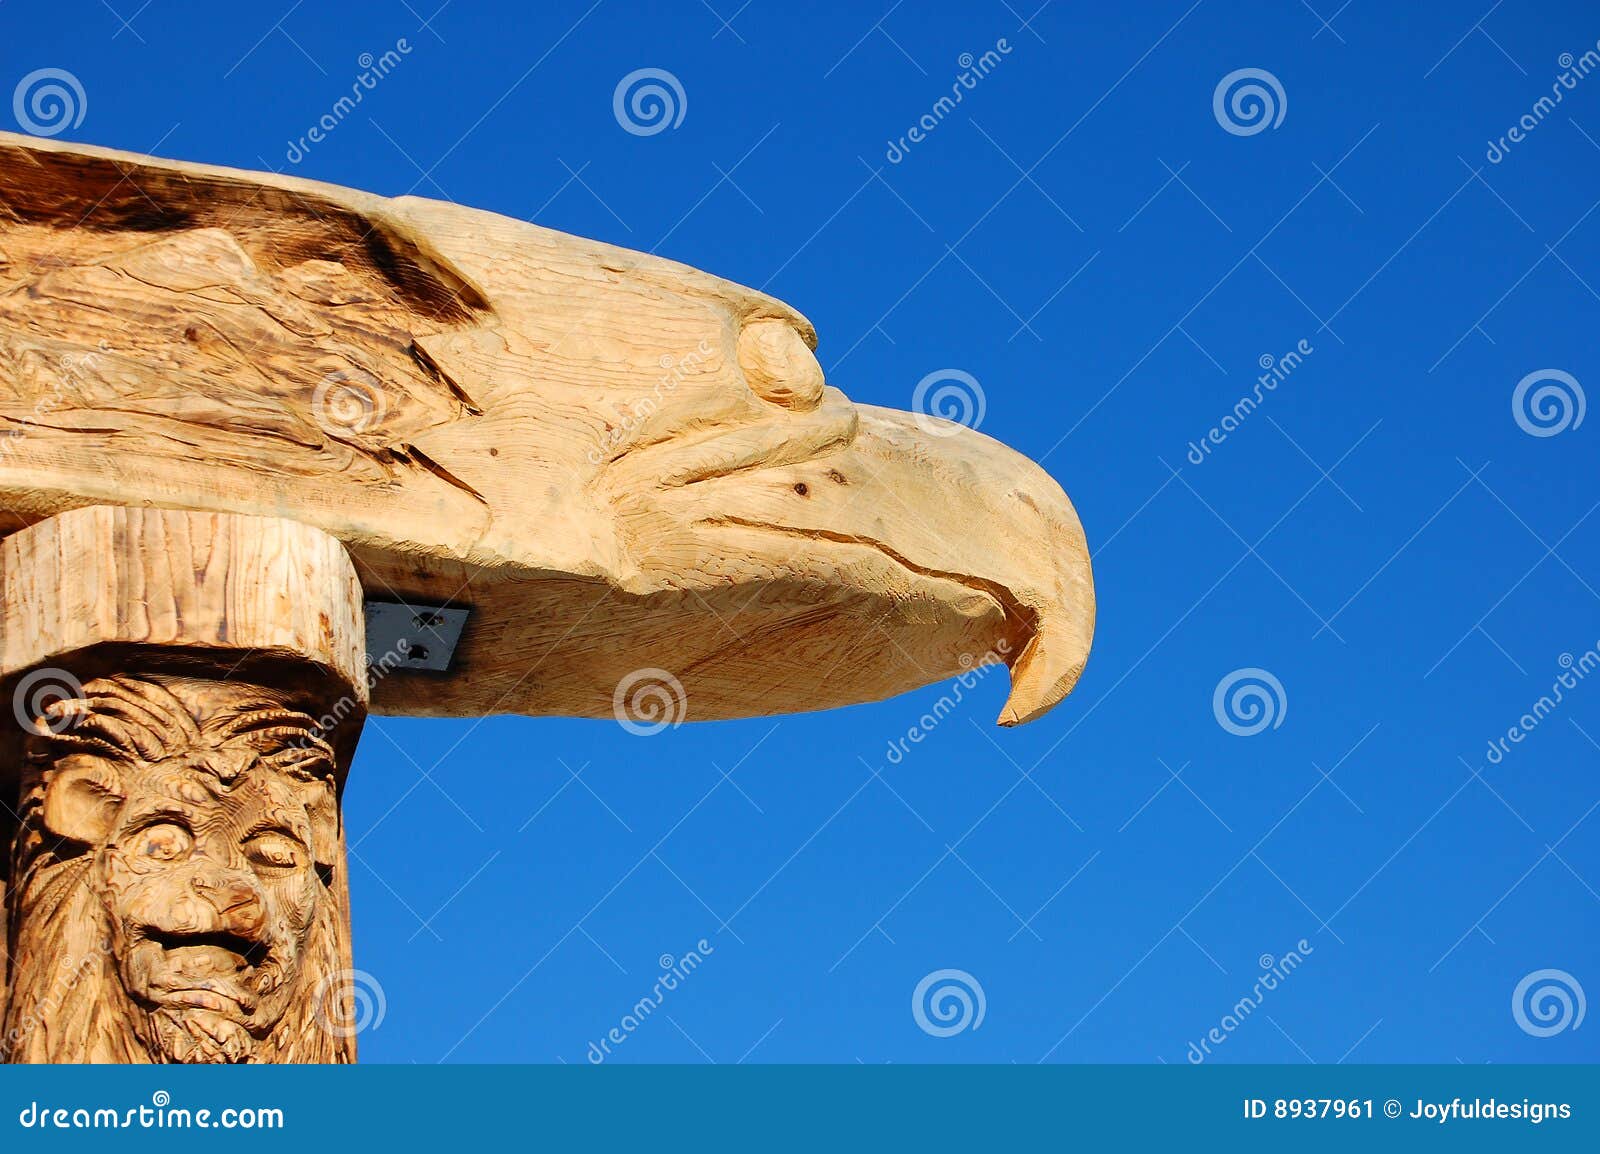 Eagle And Lion Wood Carving Totem Pole Stock Image - Image 